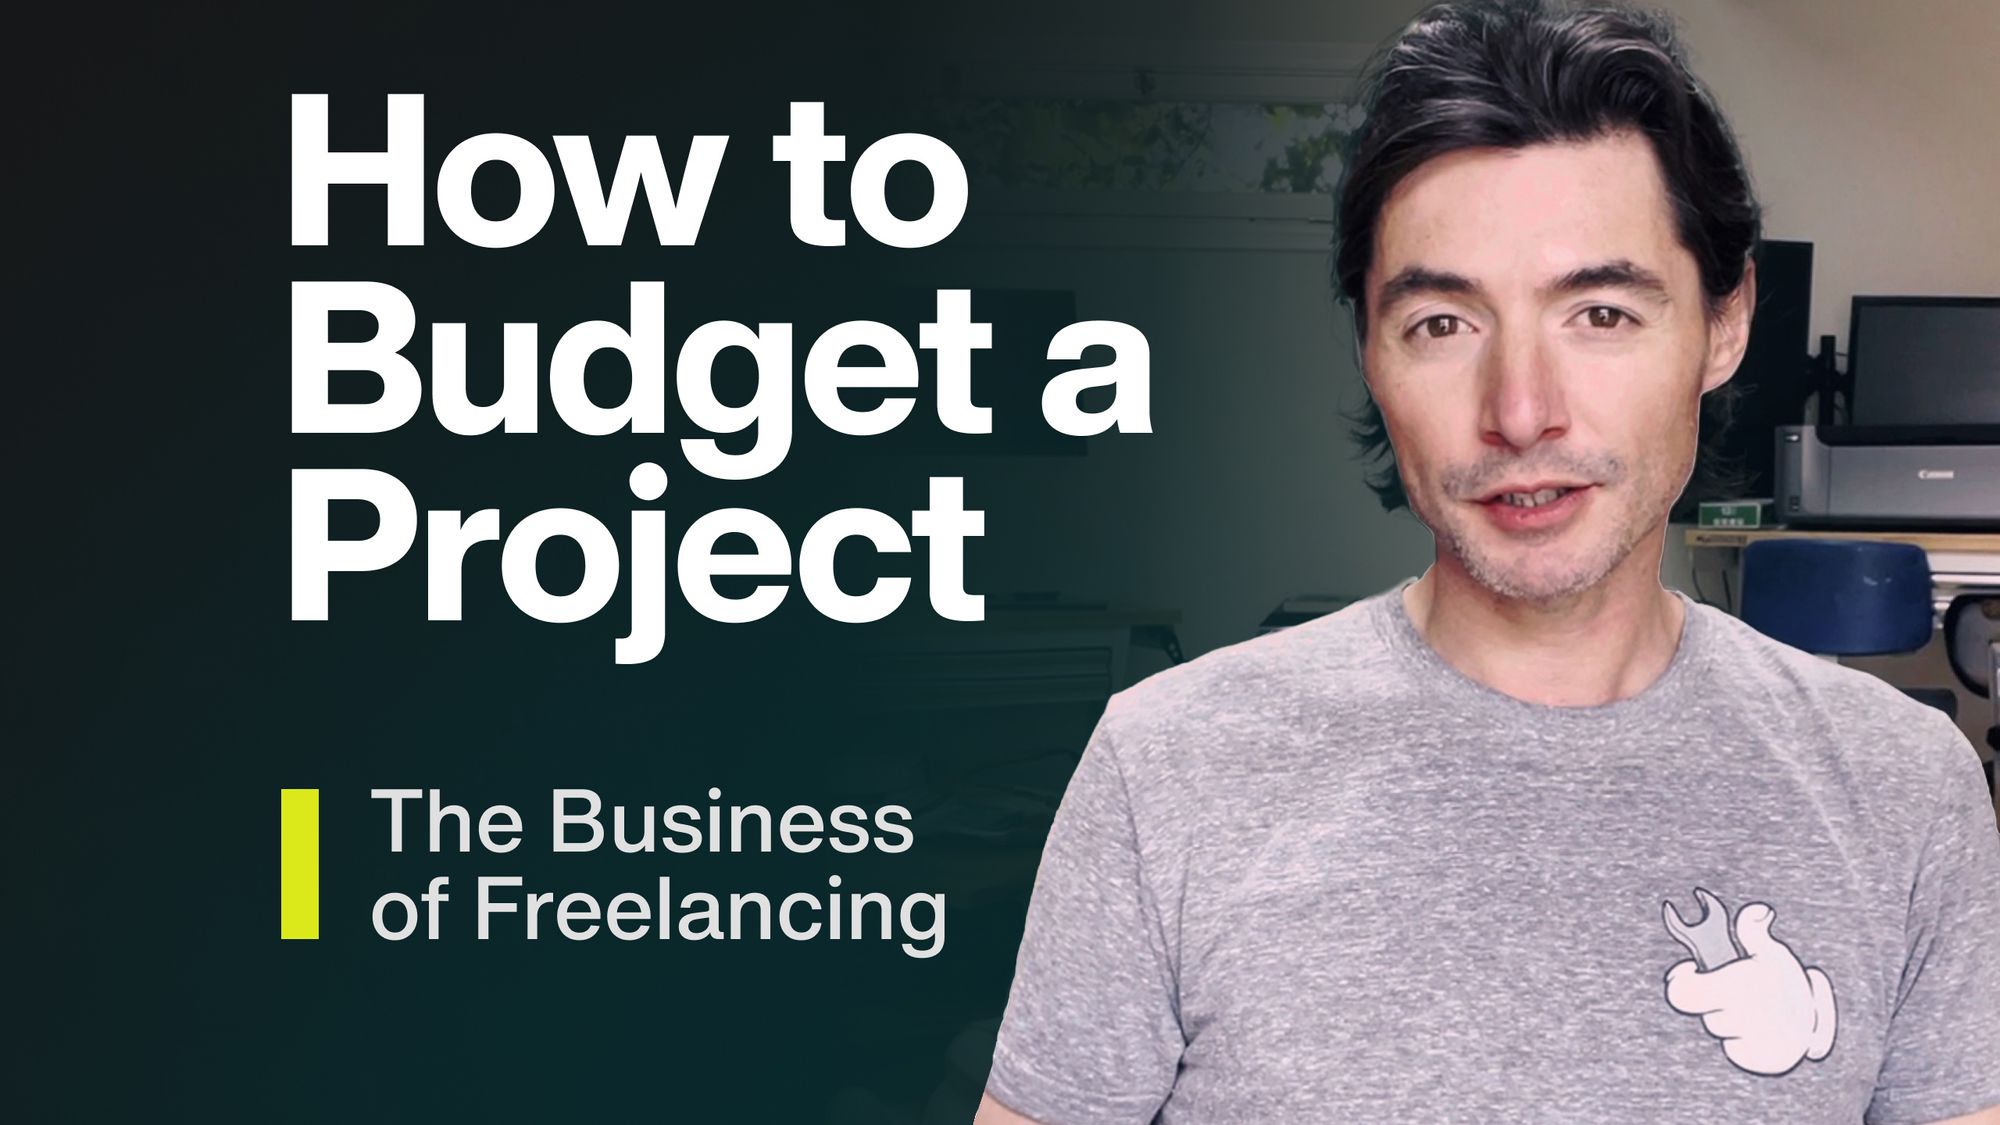 “Charge for Every Nut and Bolt:” How To Make a Budget Proposal and Find Success